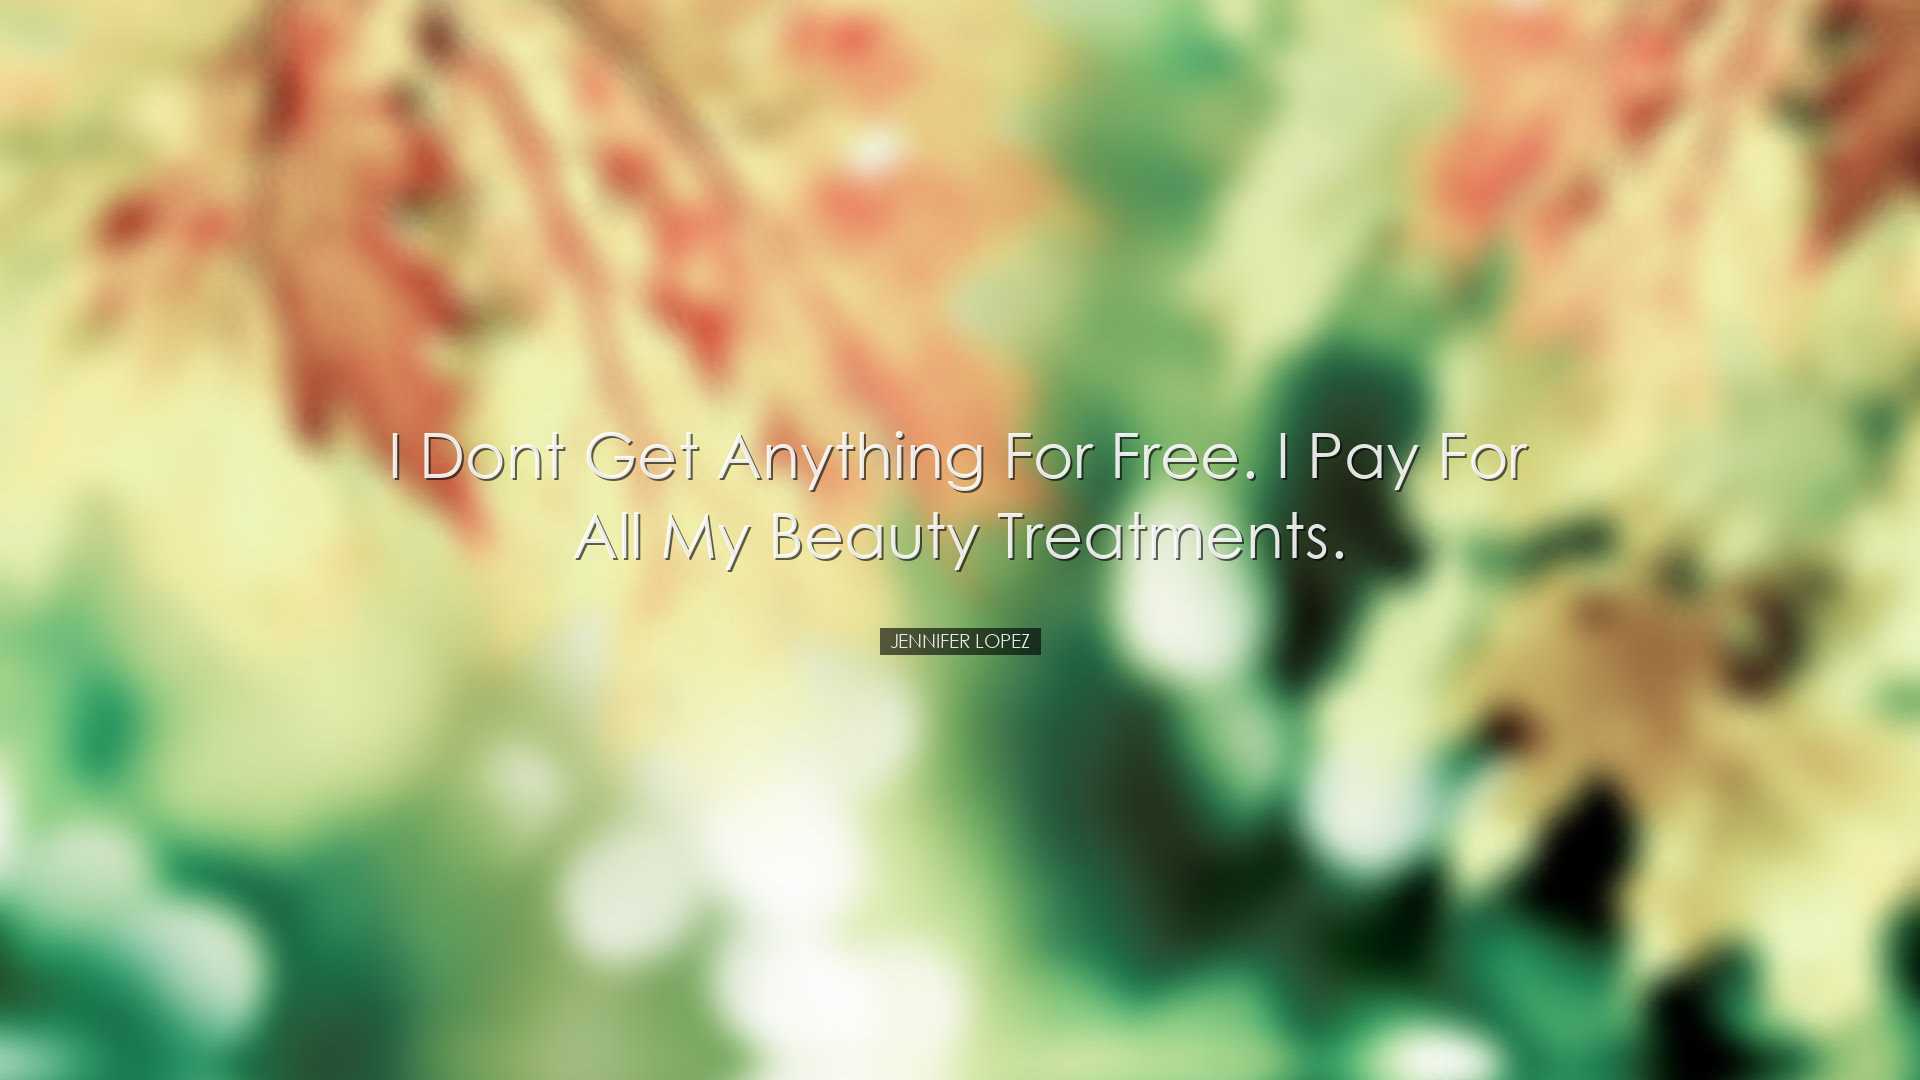 I dont get anything for free. I pay for all my beauty treatments.